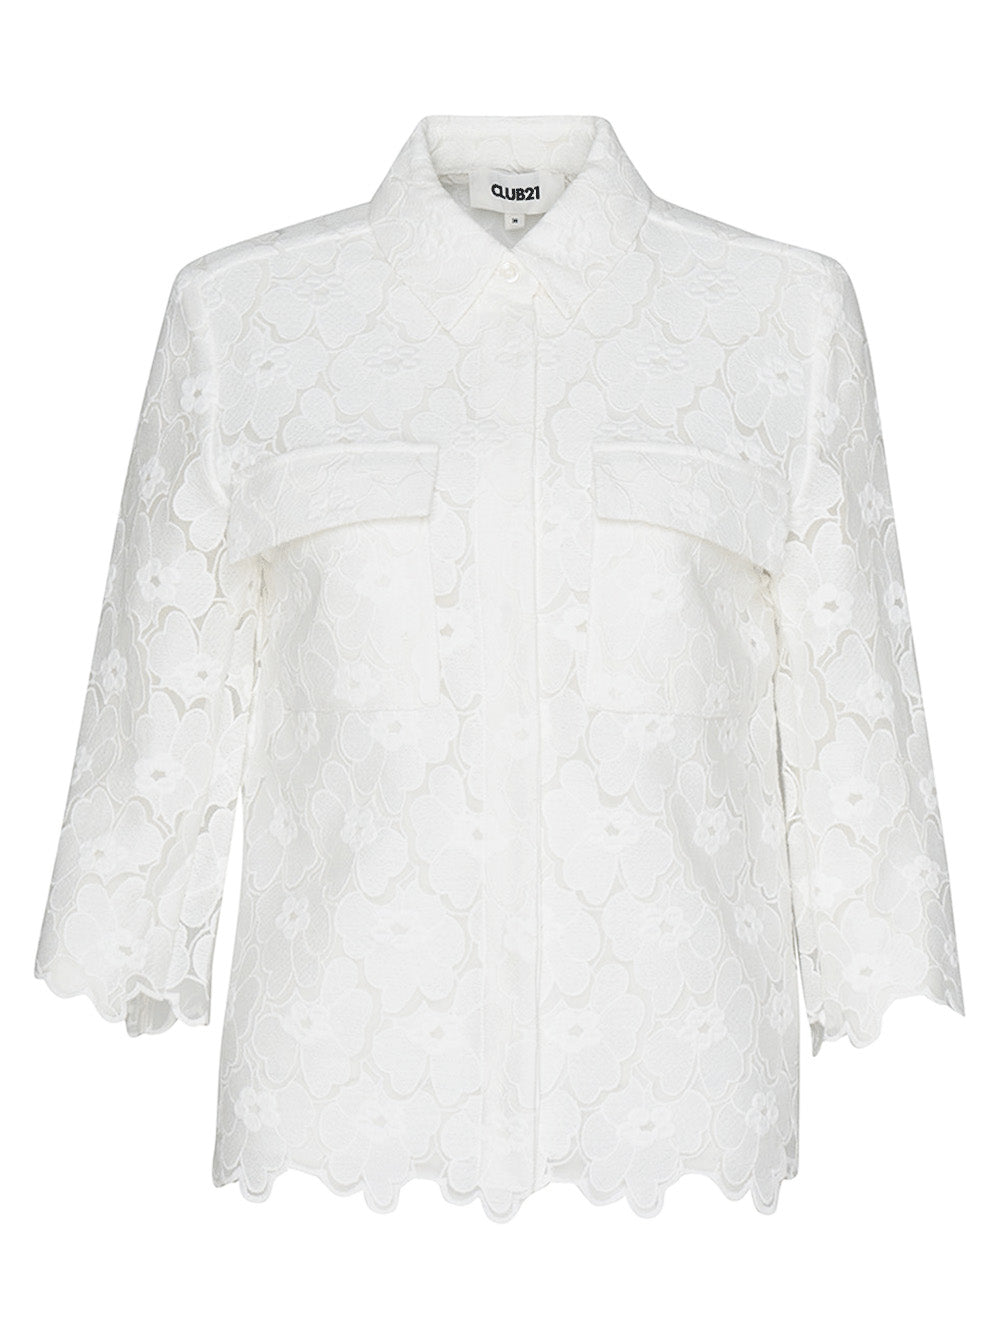    Club21-Collection-Floral-Lace-Patch-Shirt-White-1